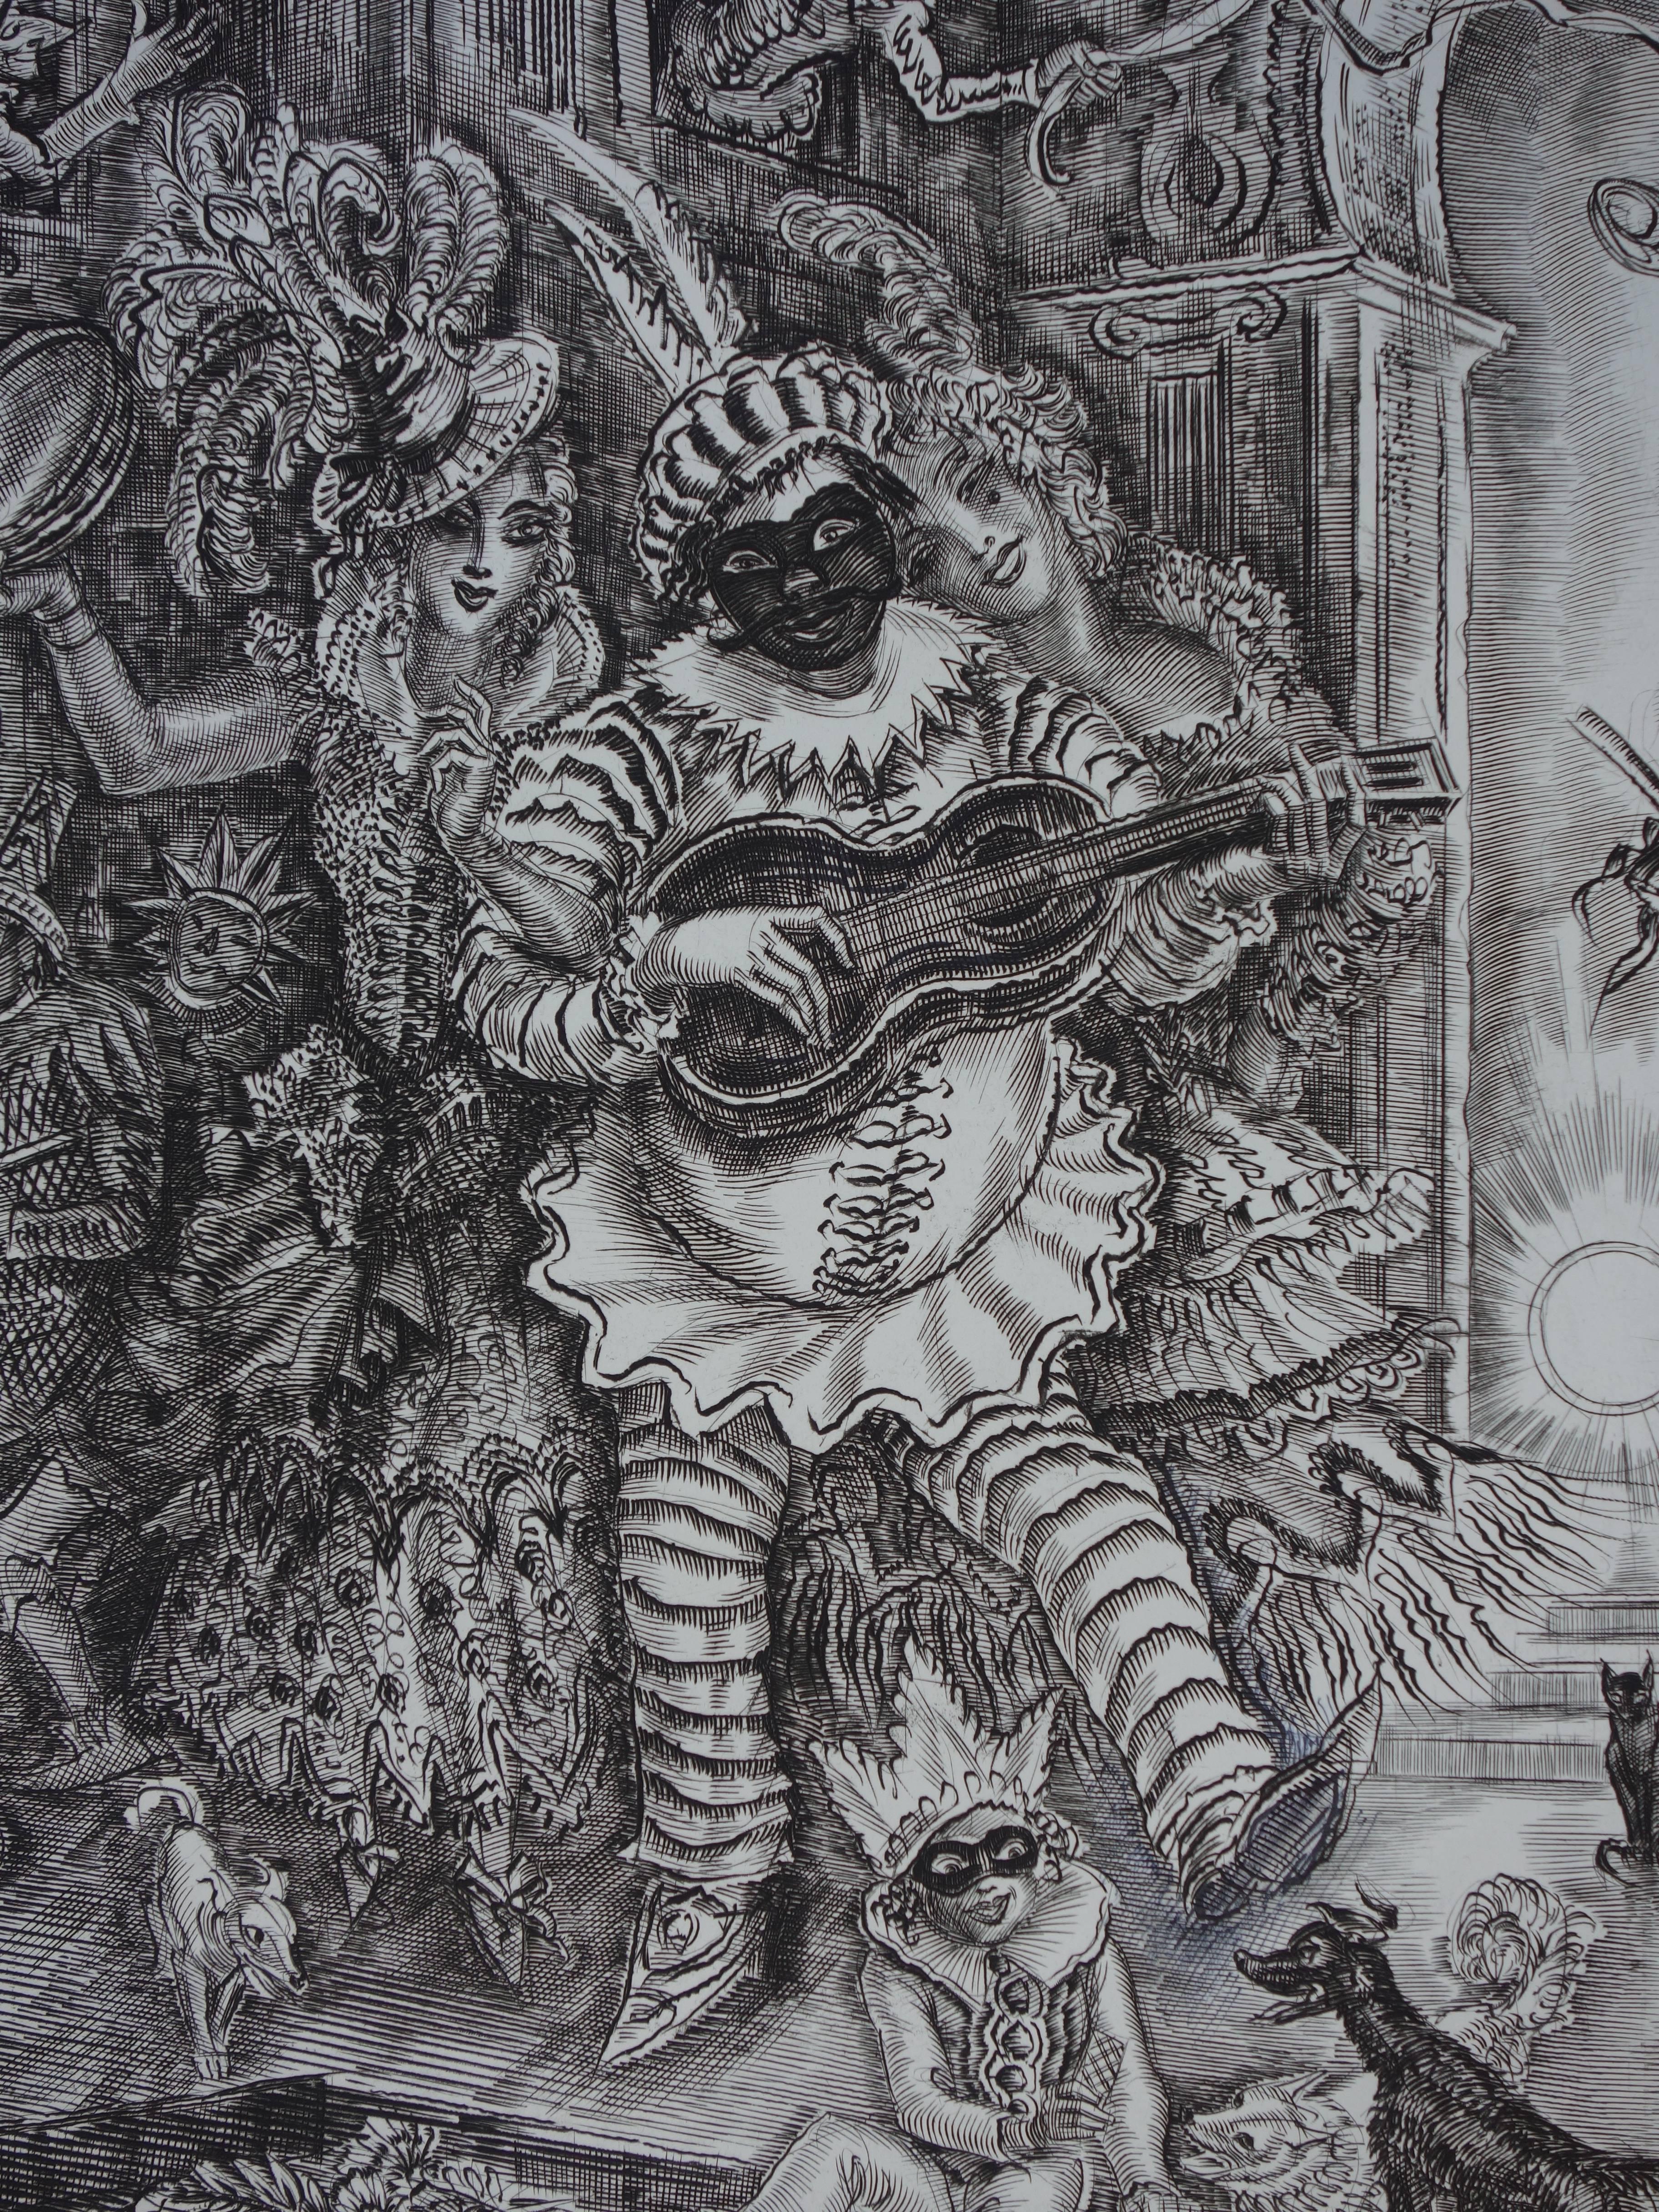 February : Carnival time - Original handsigned etching - Exceptional n° 1/100 - Realist Print by Albert Decaris